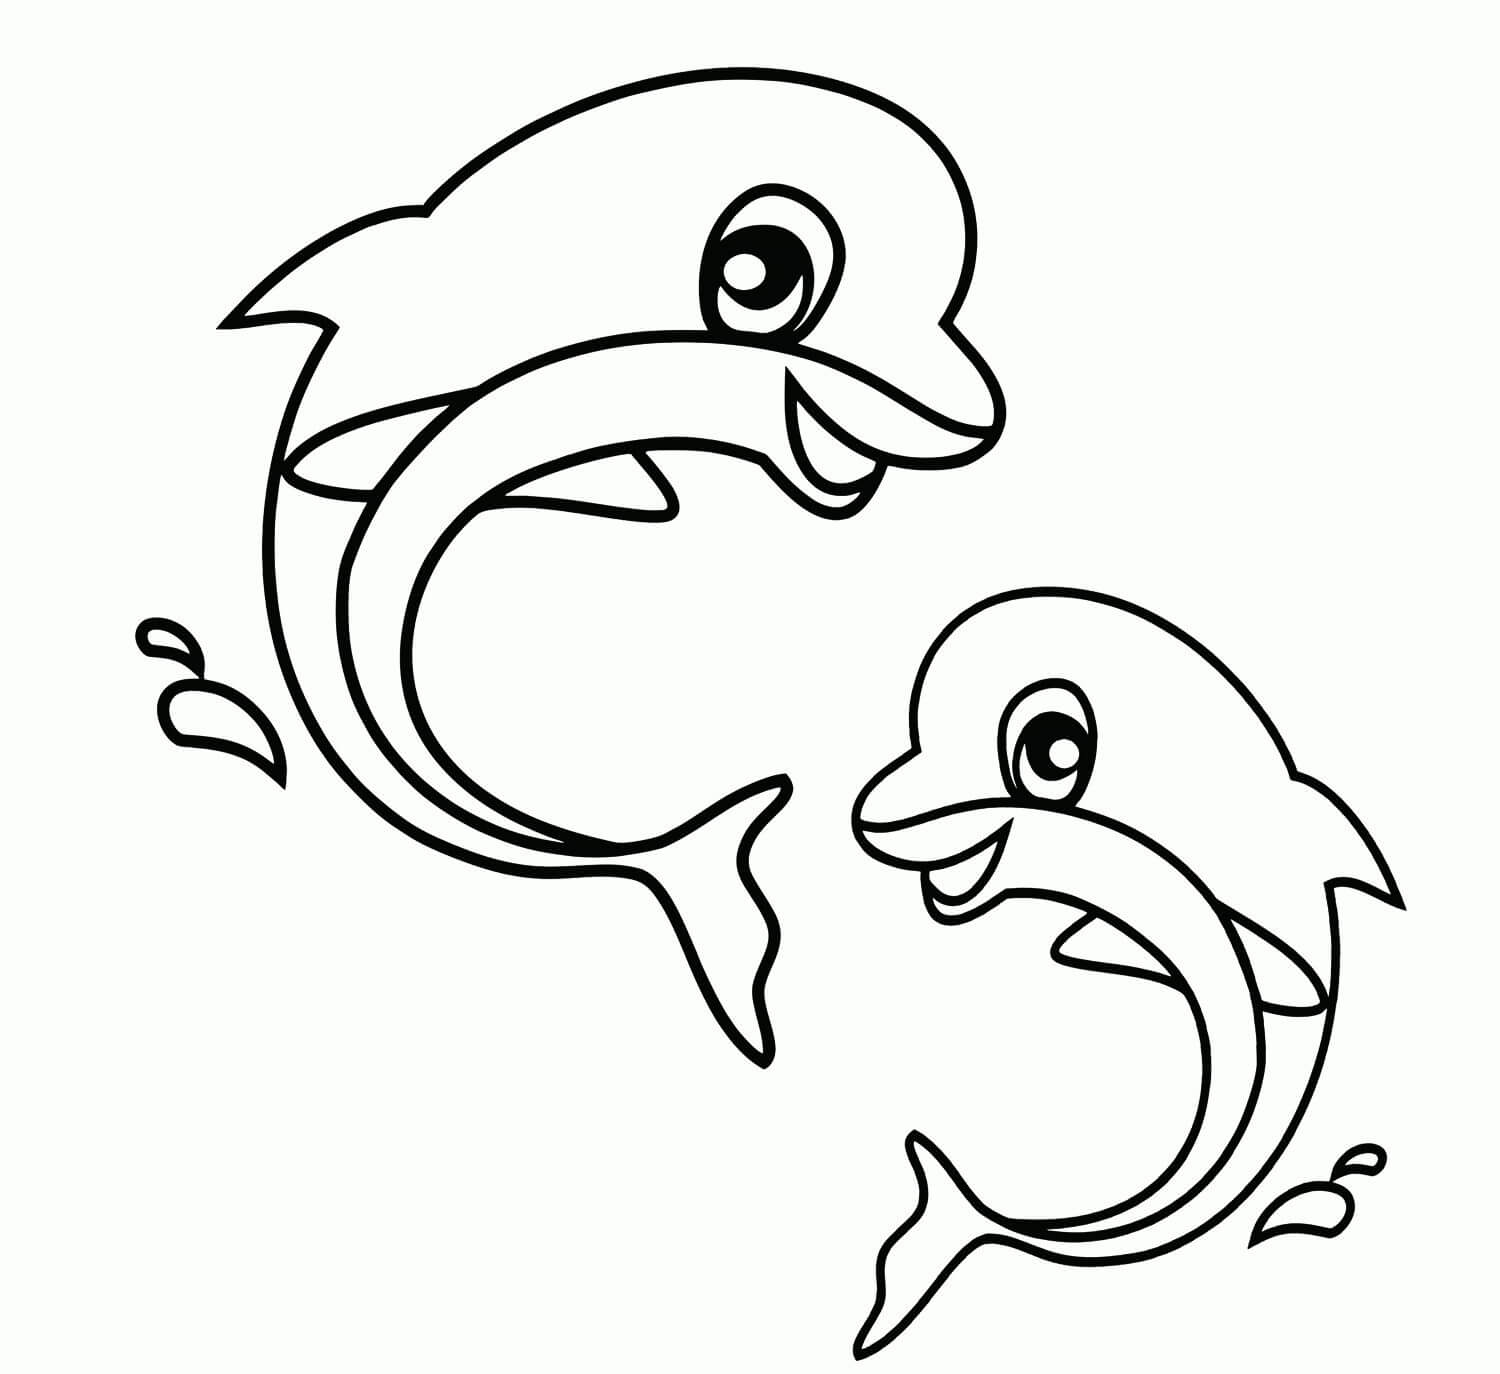 Friendly & Fun Loving Dolphins Animal - Free Animal Pictures to Color for Little Ones